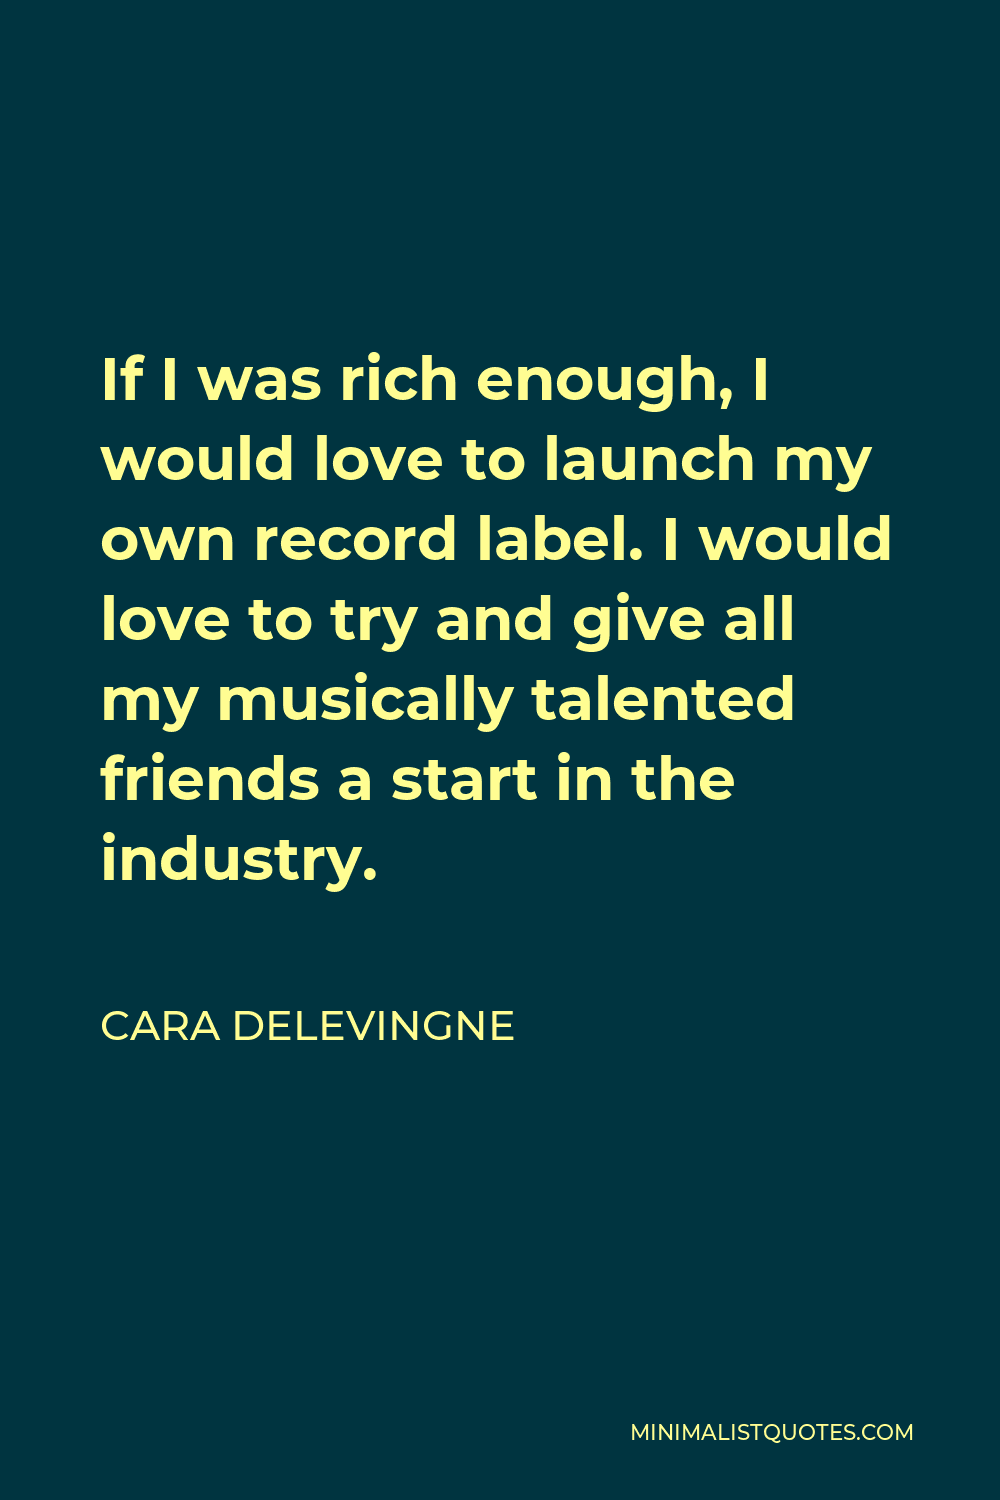 Cara Delevingne Quote - If I was rich enough, I would love to launch my own record label. I would love to try and give all my musically talented friends a start in the industry.